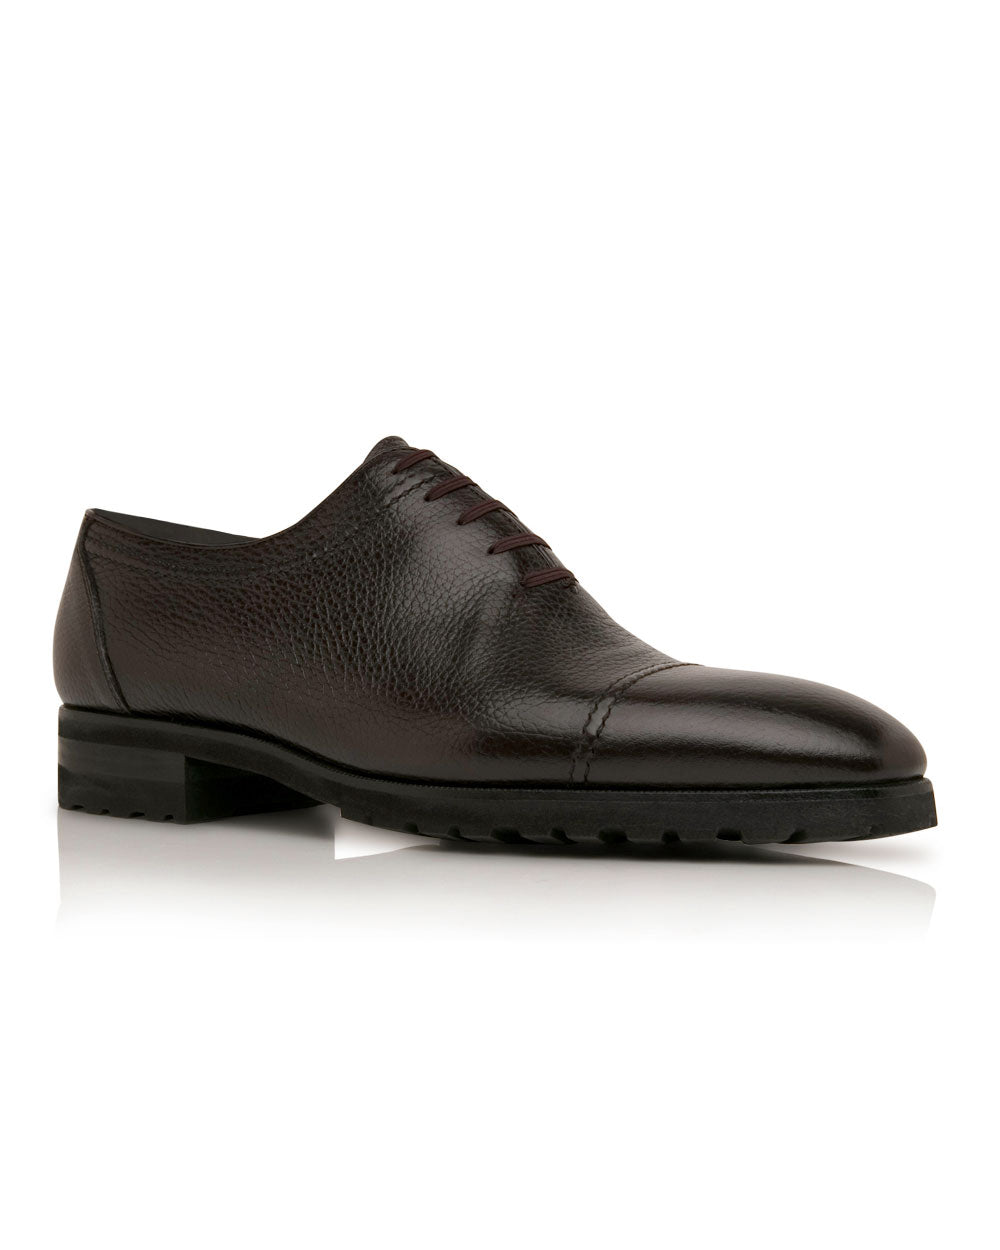 Pebbled Leather Oxford in Dark Brown